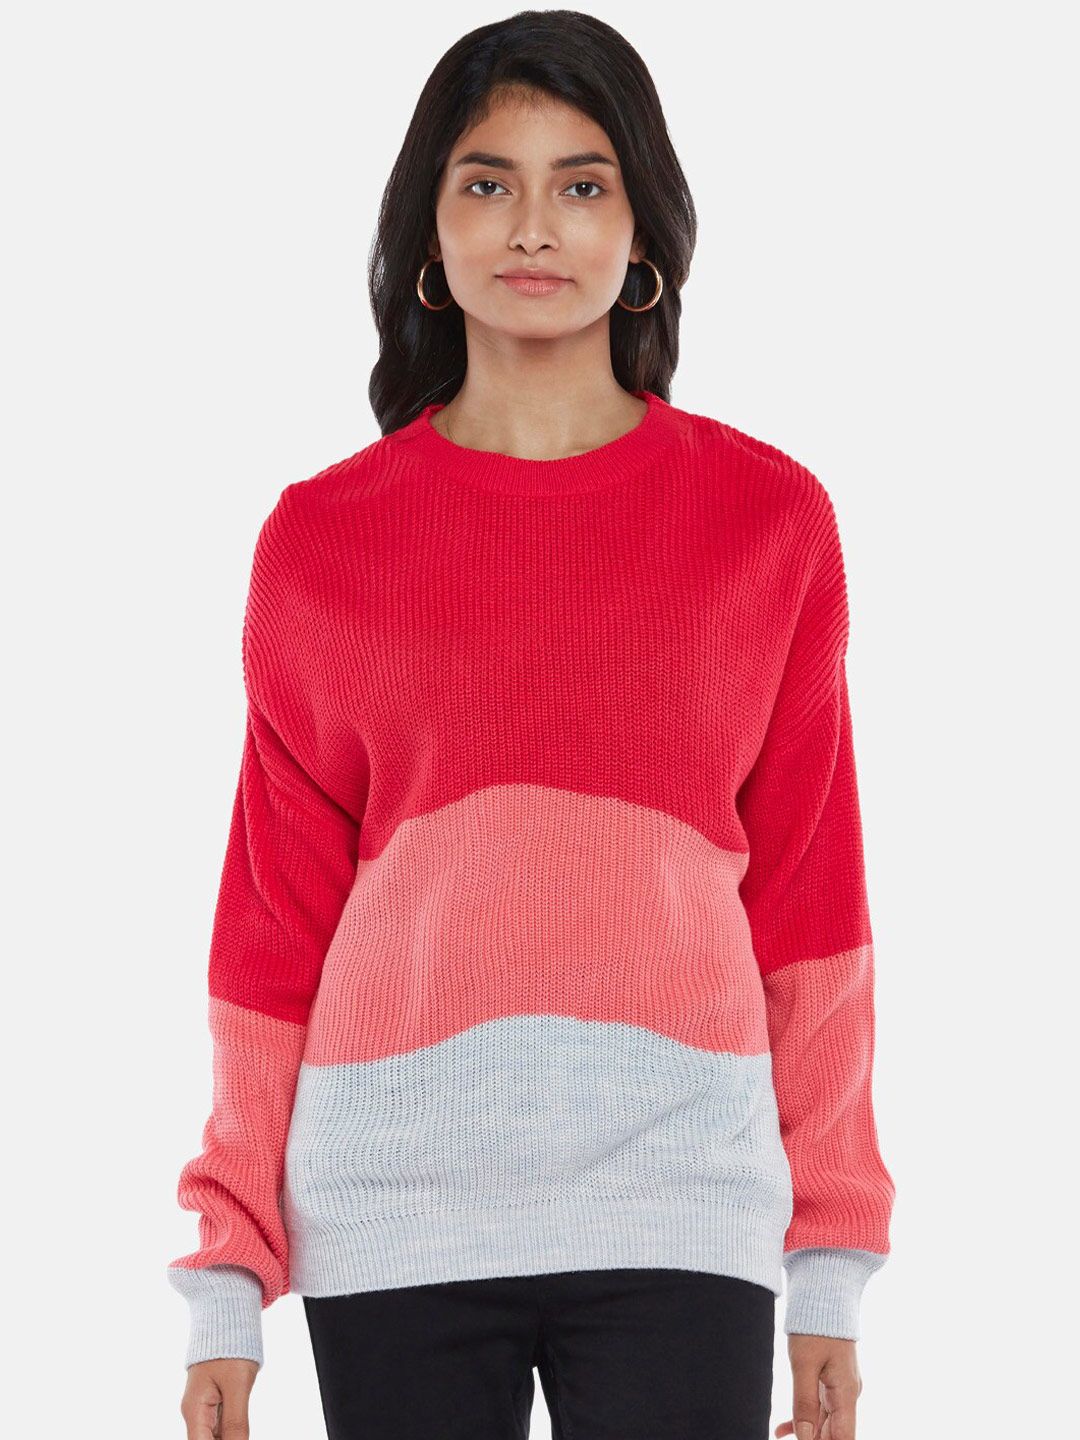 Honey by Pantaloons Women Pink & White Colourblocked Pullover Sweater Price in India